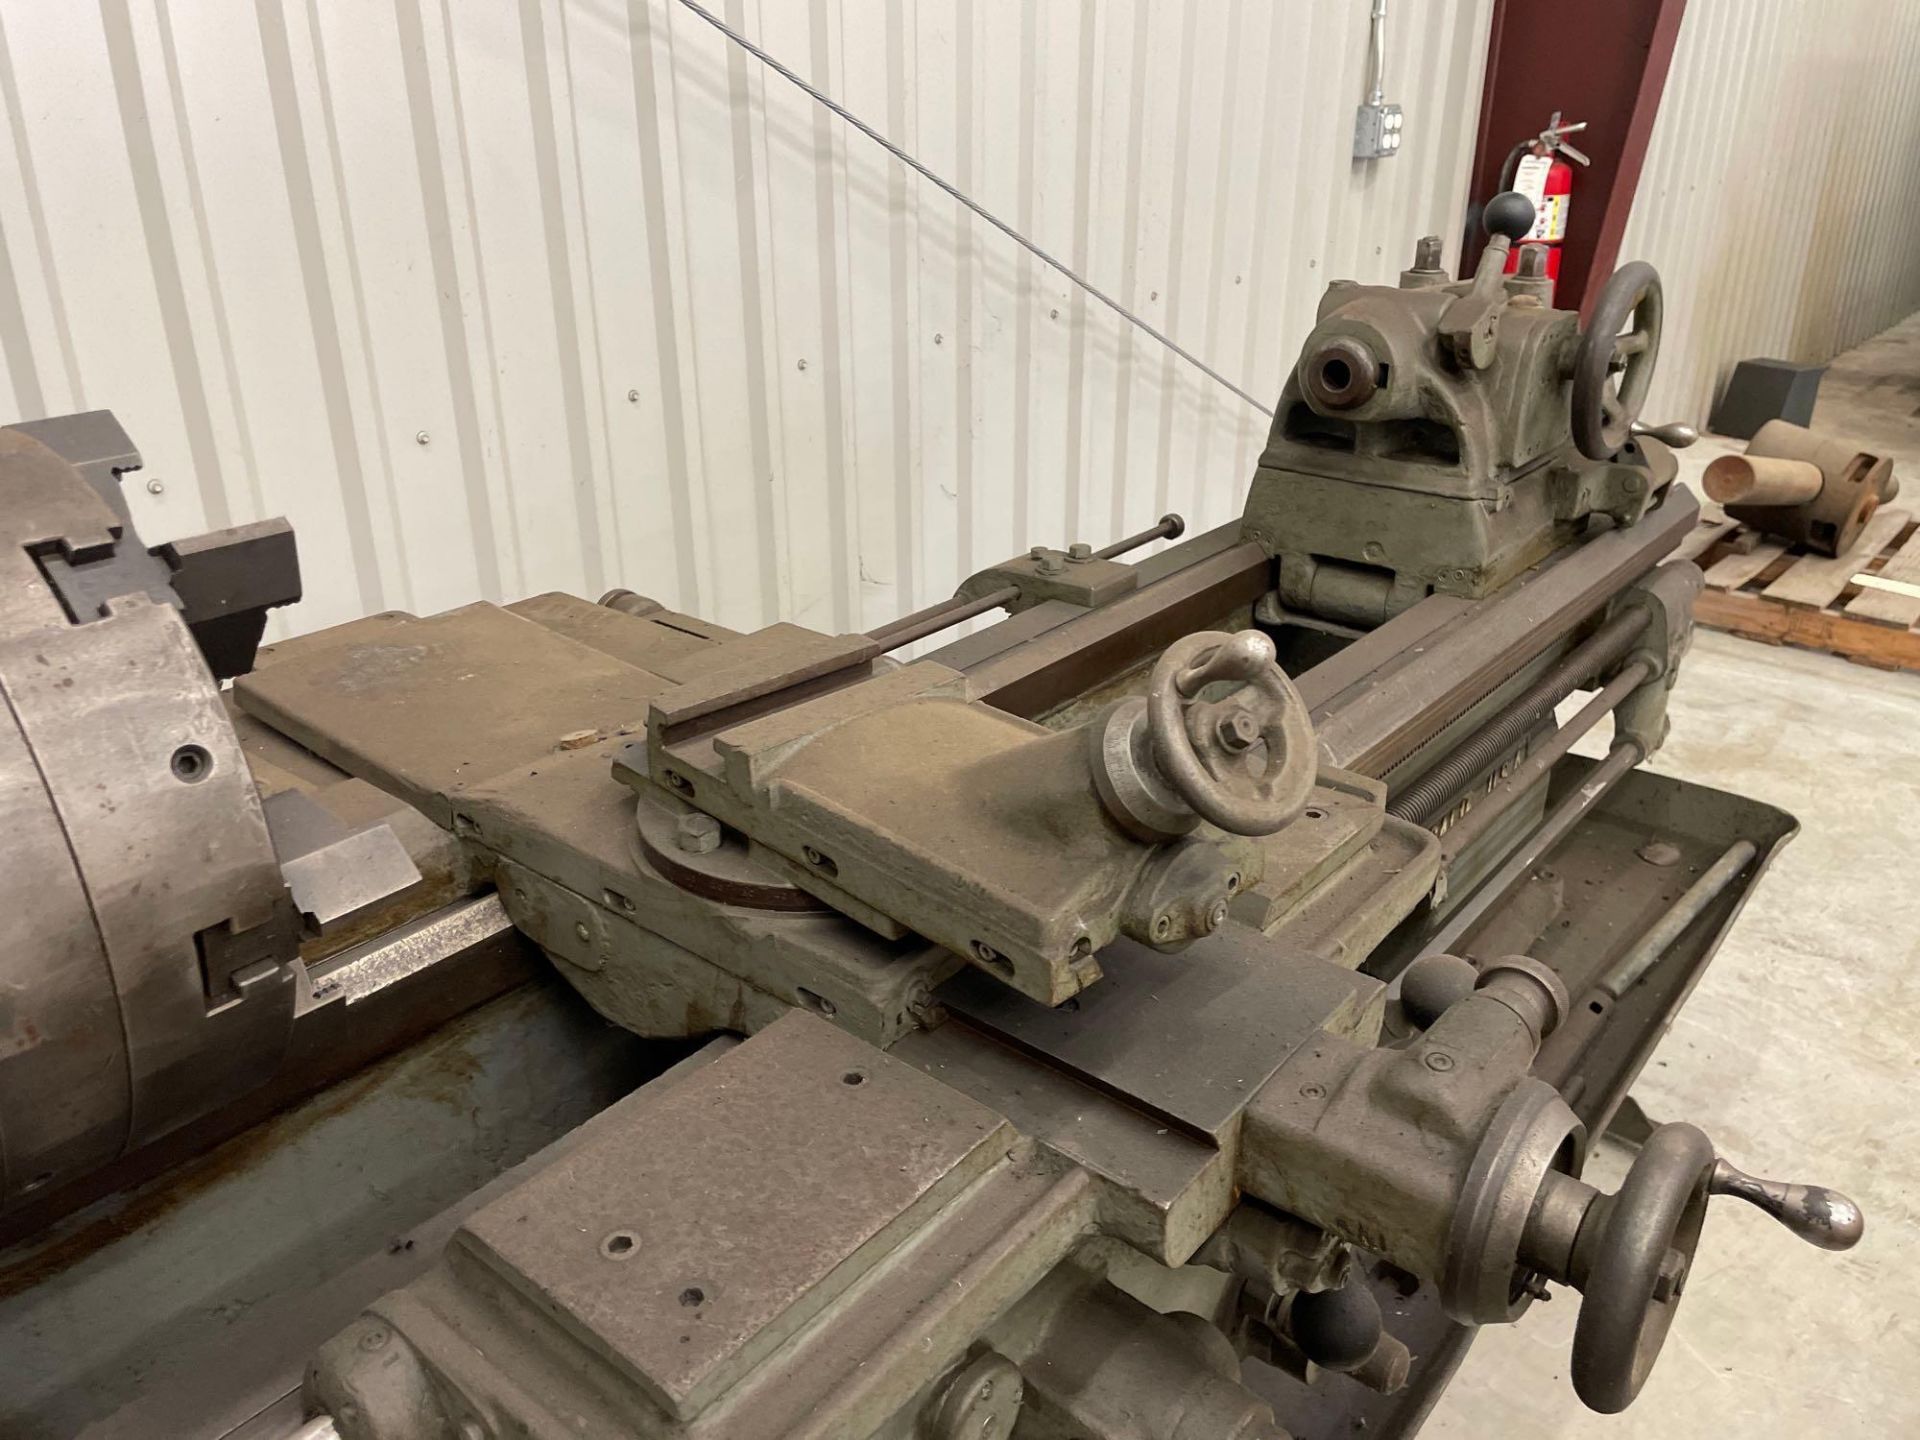 Axelson 16 Lathe, S/N 2789 - Image 4 of 7